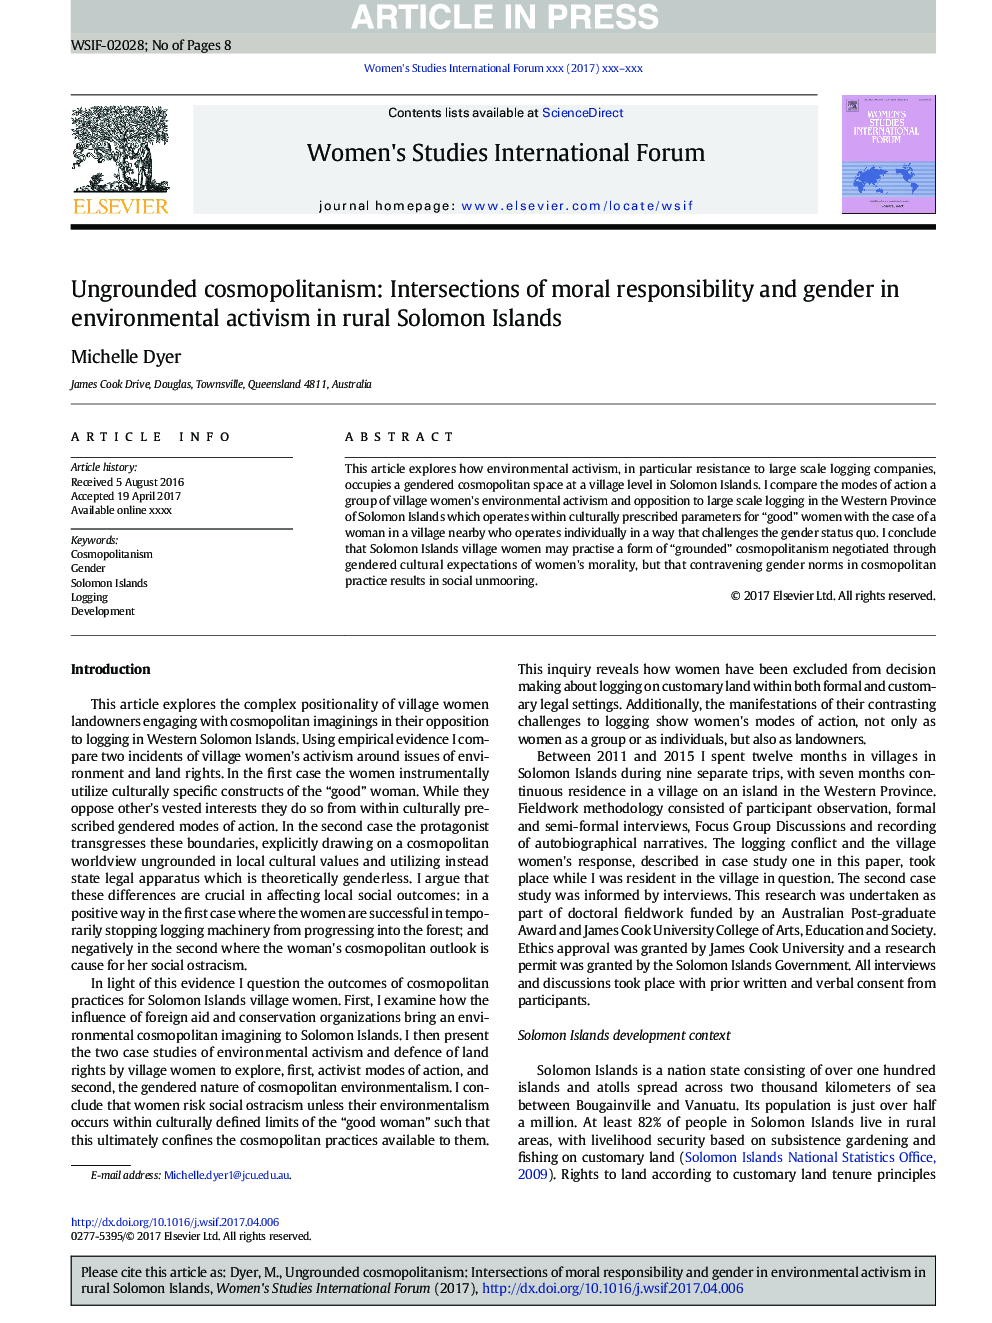 Ungrounded cosmopolitanism: Intersections of moral responsibility and gender in environmental activism in rural Solomon Islands